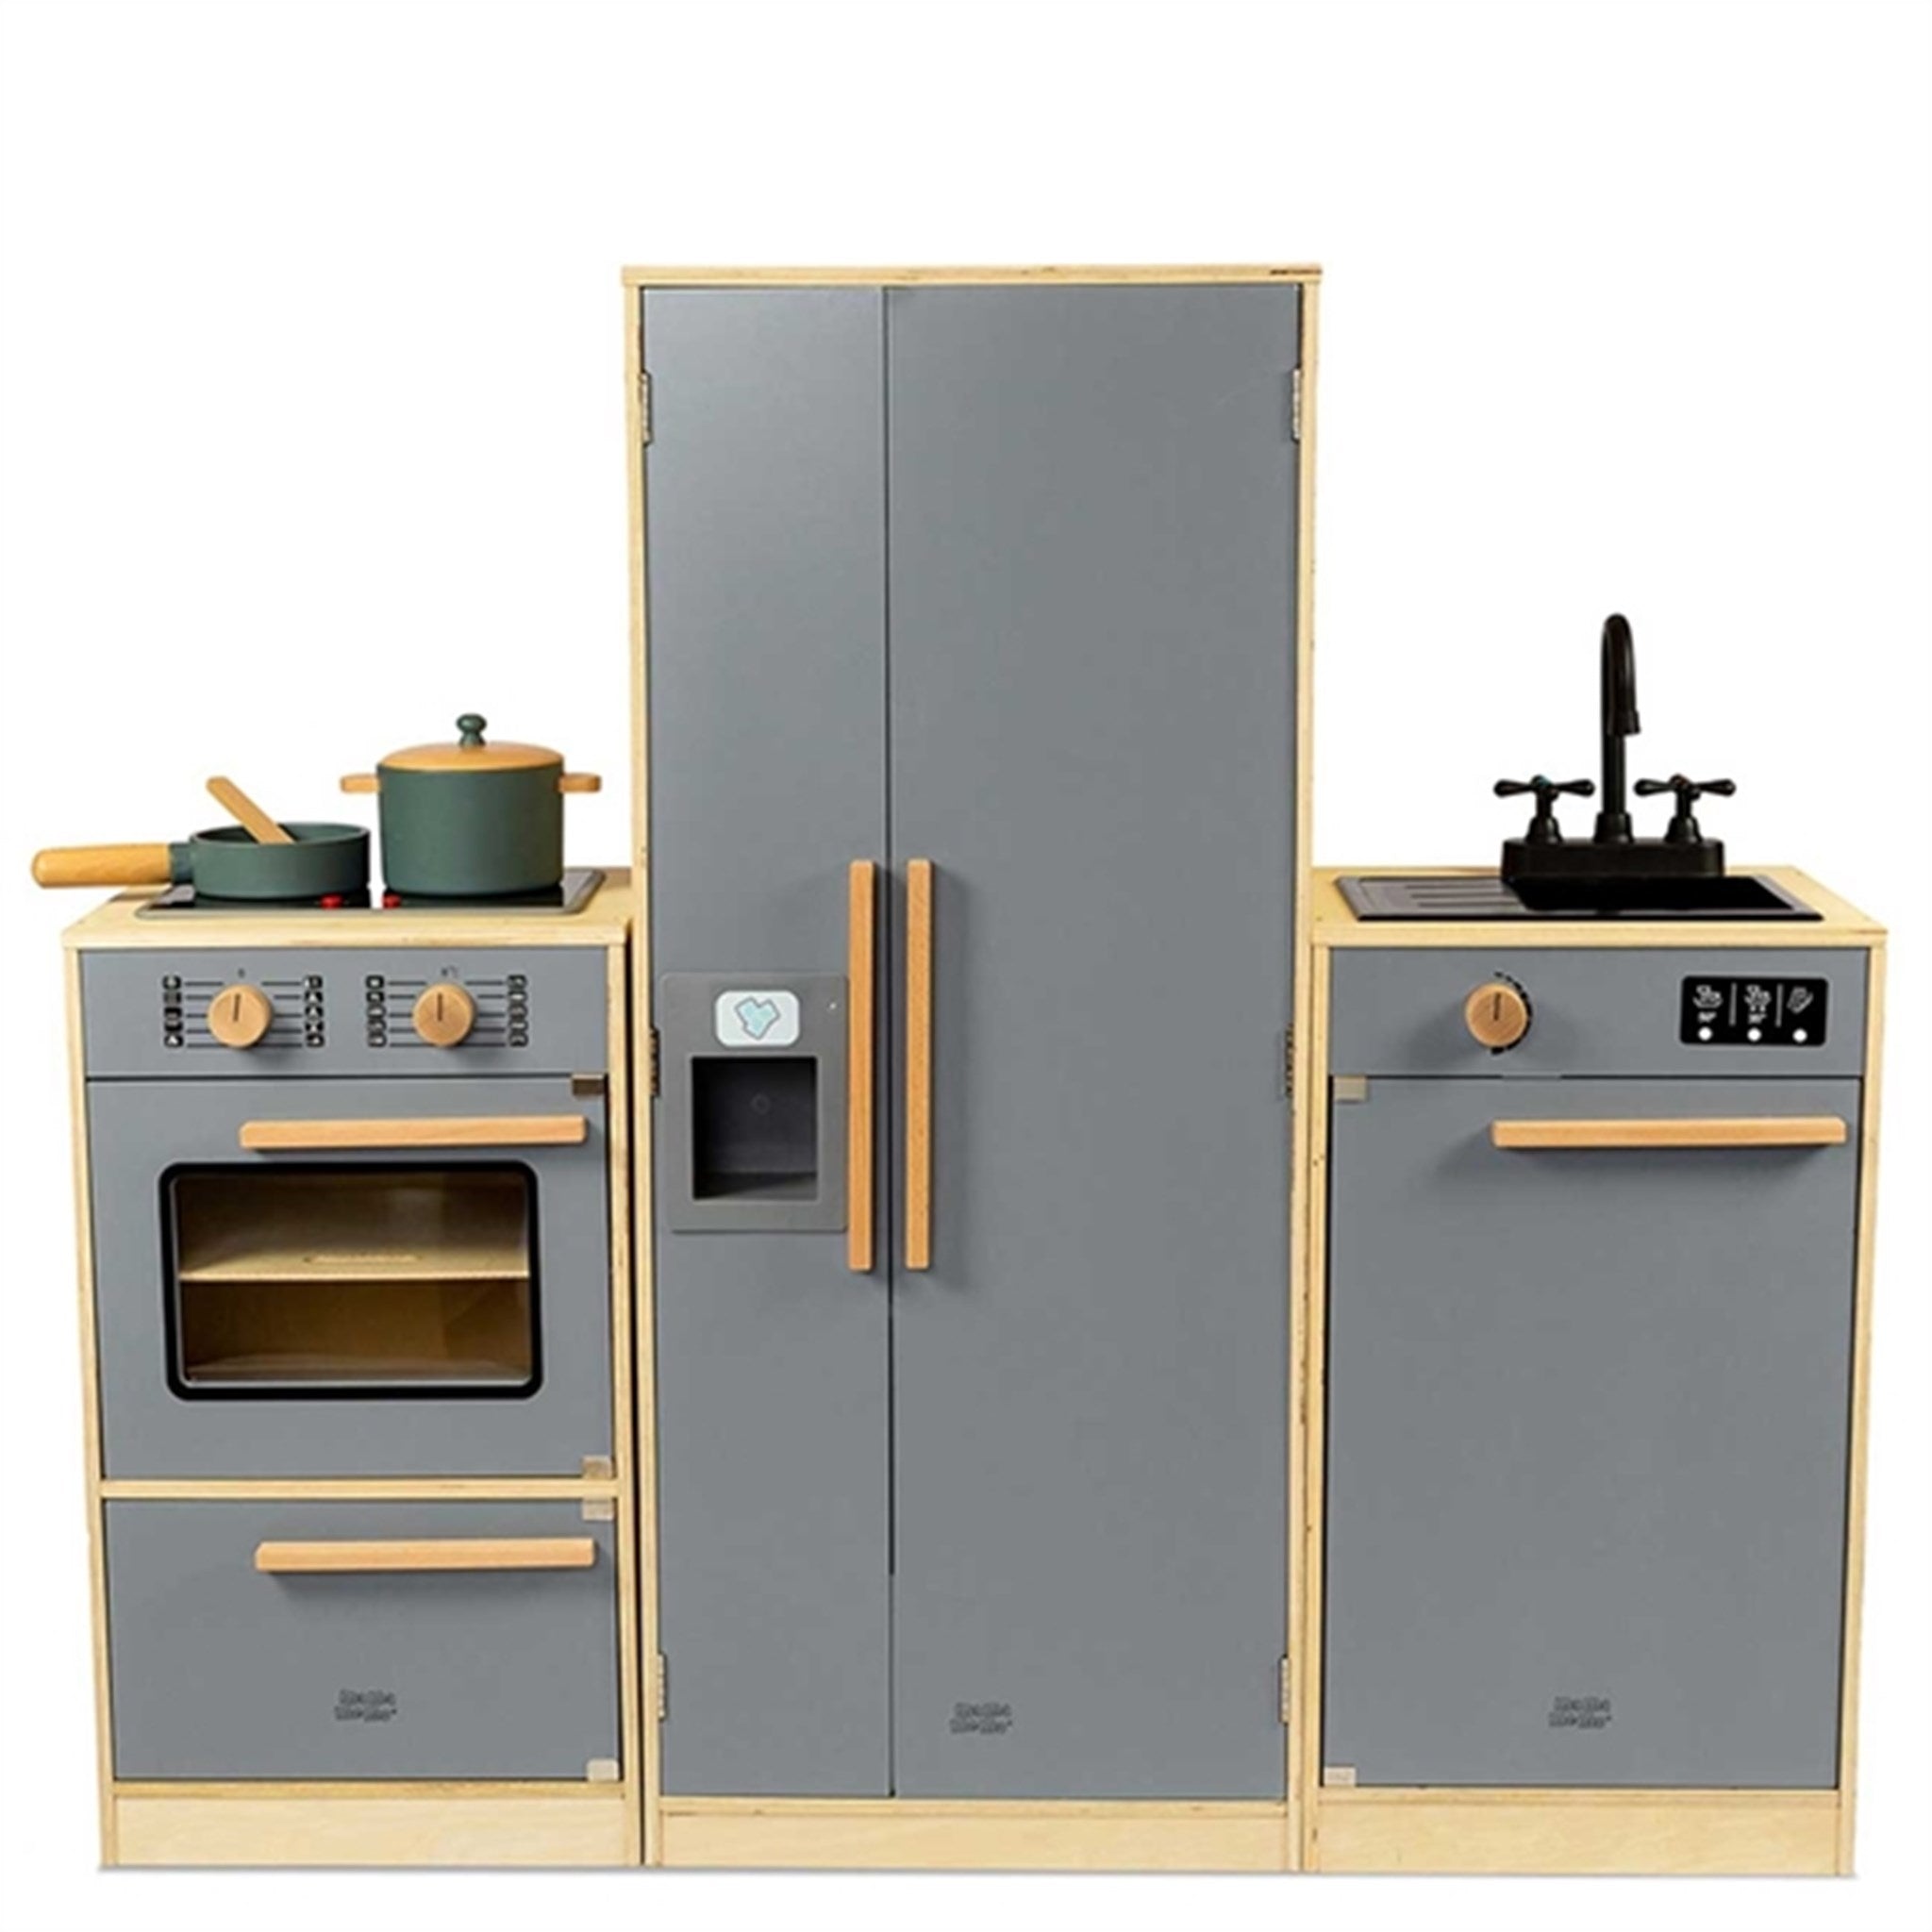 MaMaMeMo Oven with Hob Emerald Grey 2